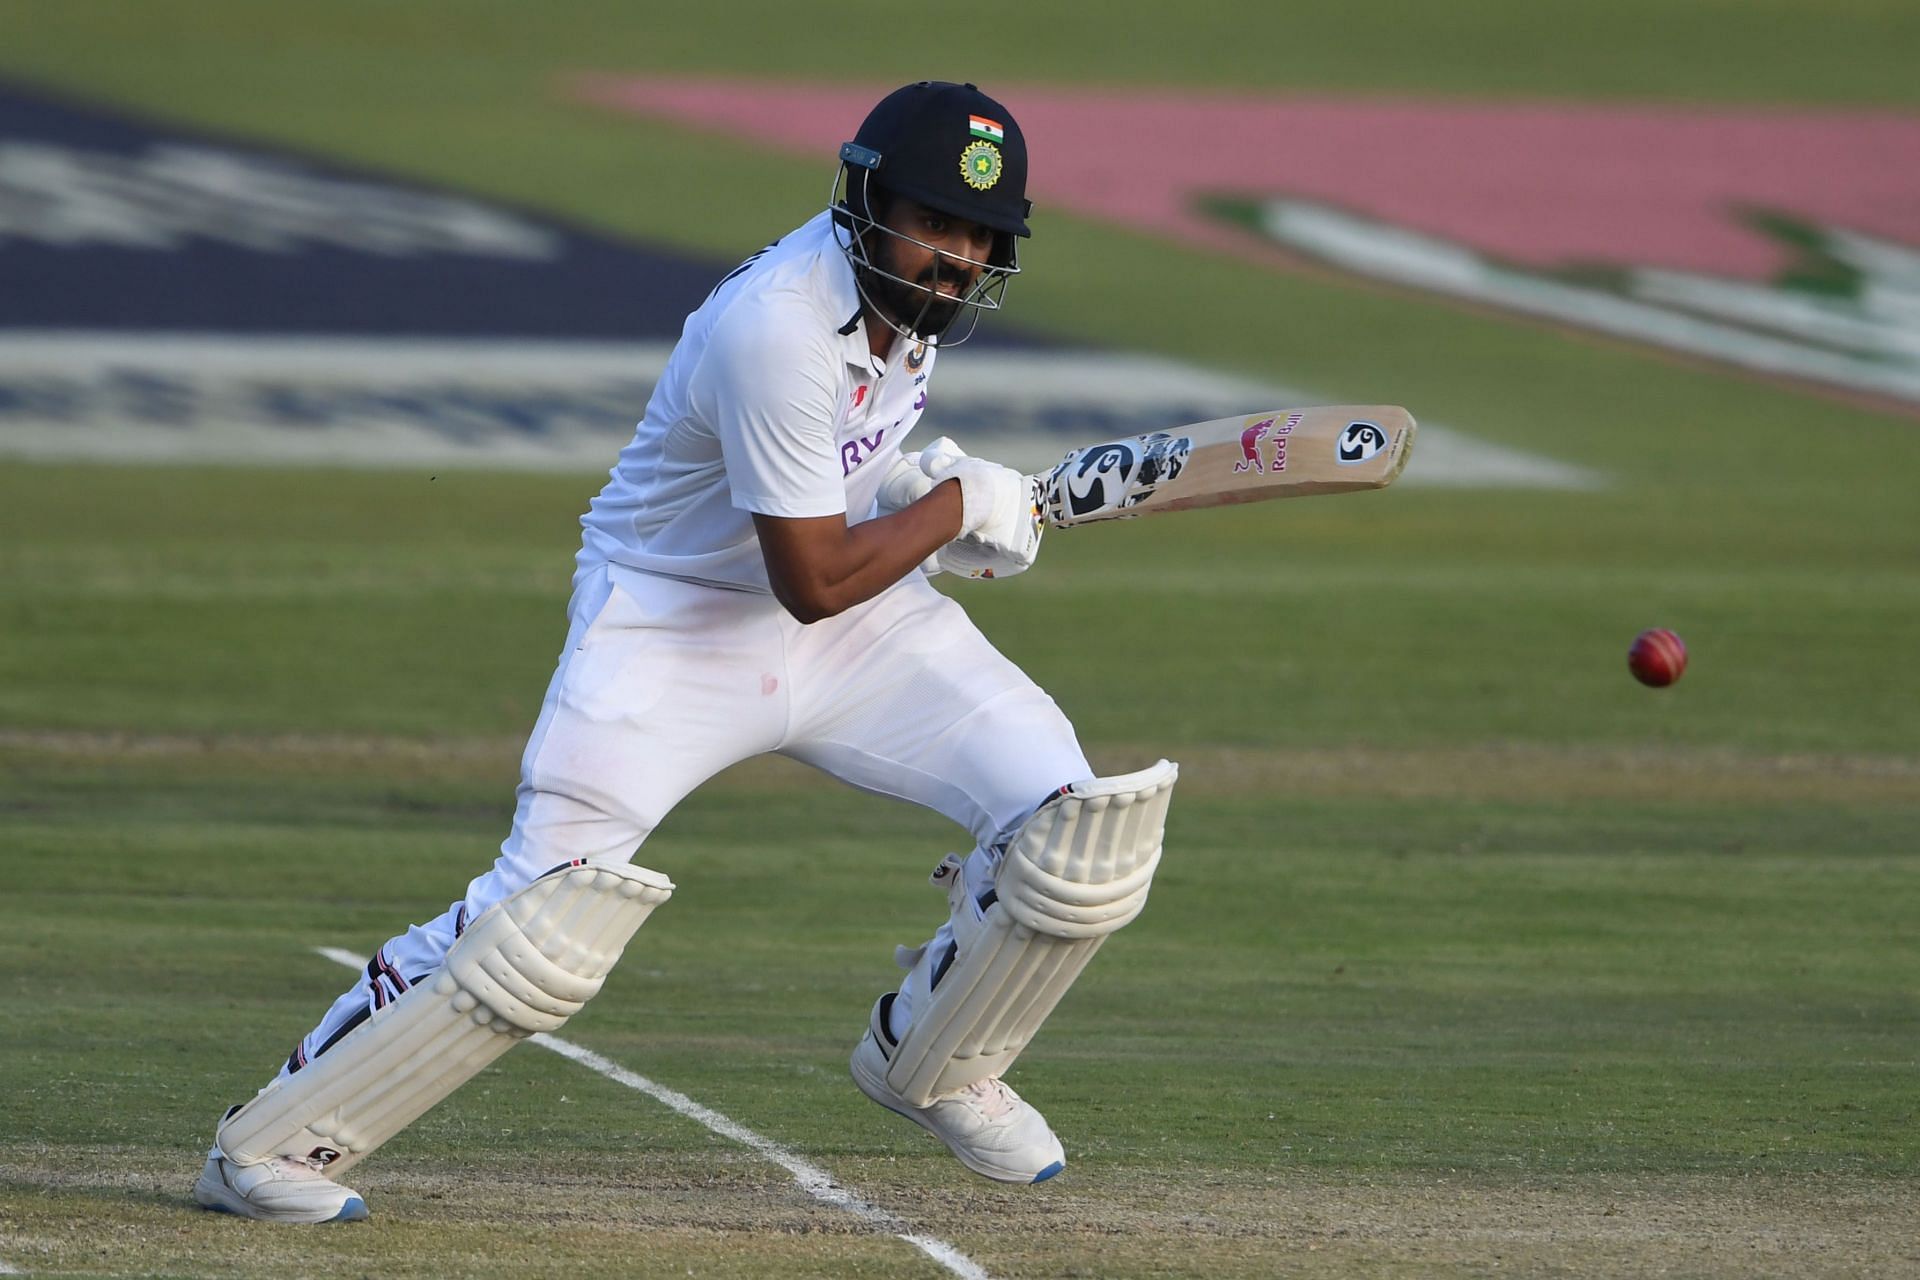 KL Rahul exhibited great patience throughout his innings.